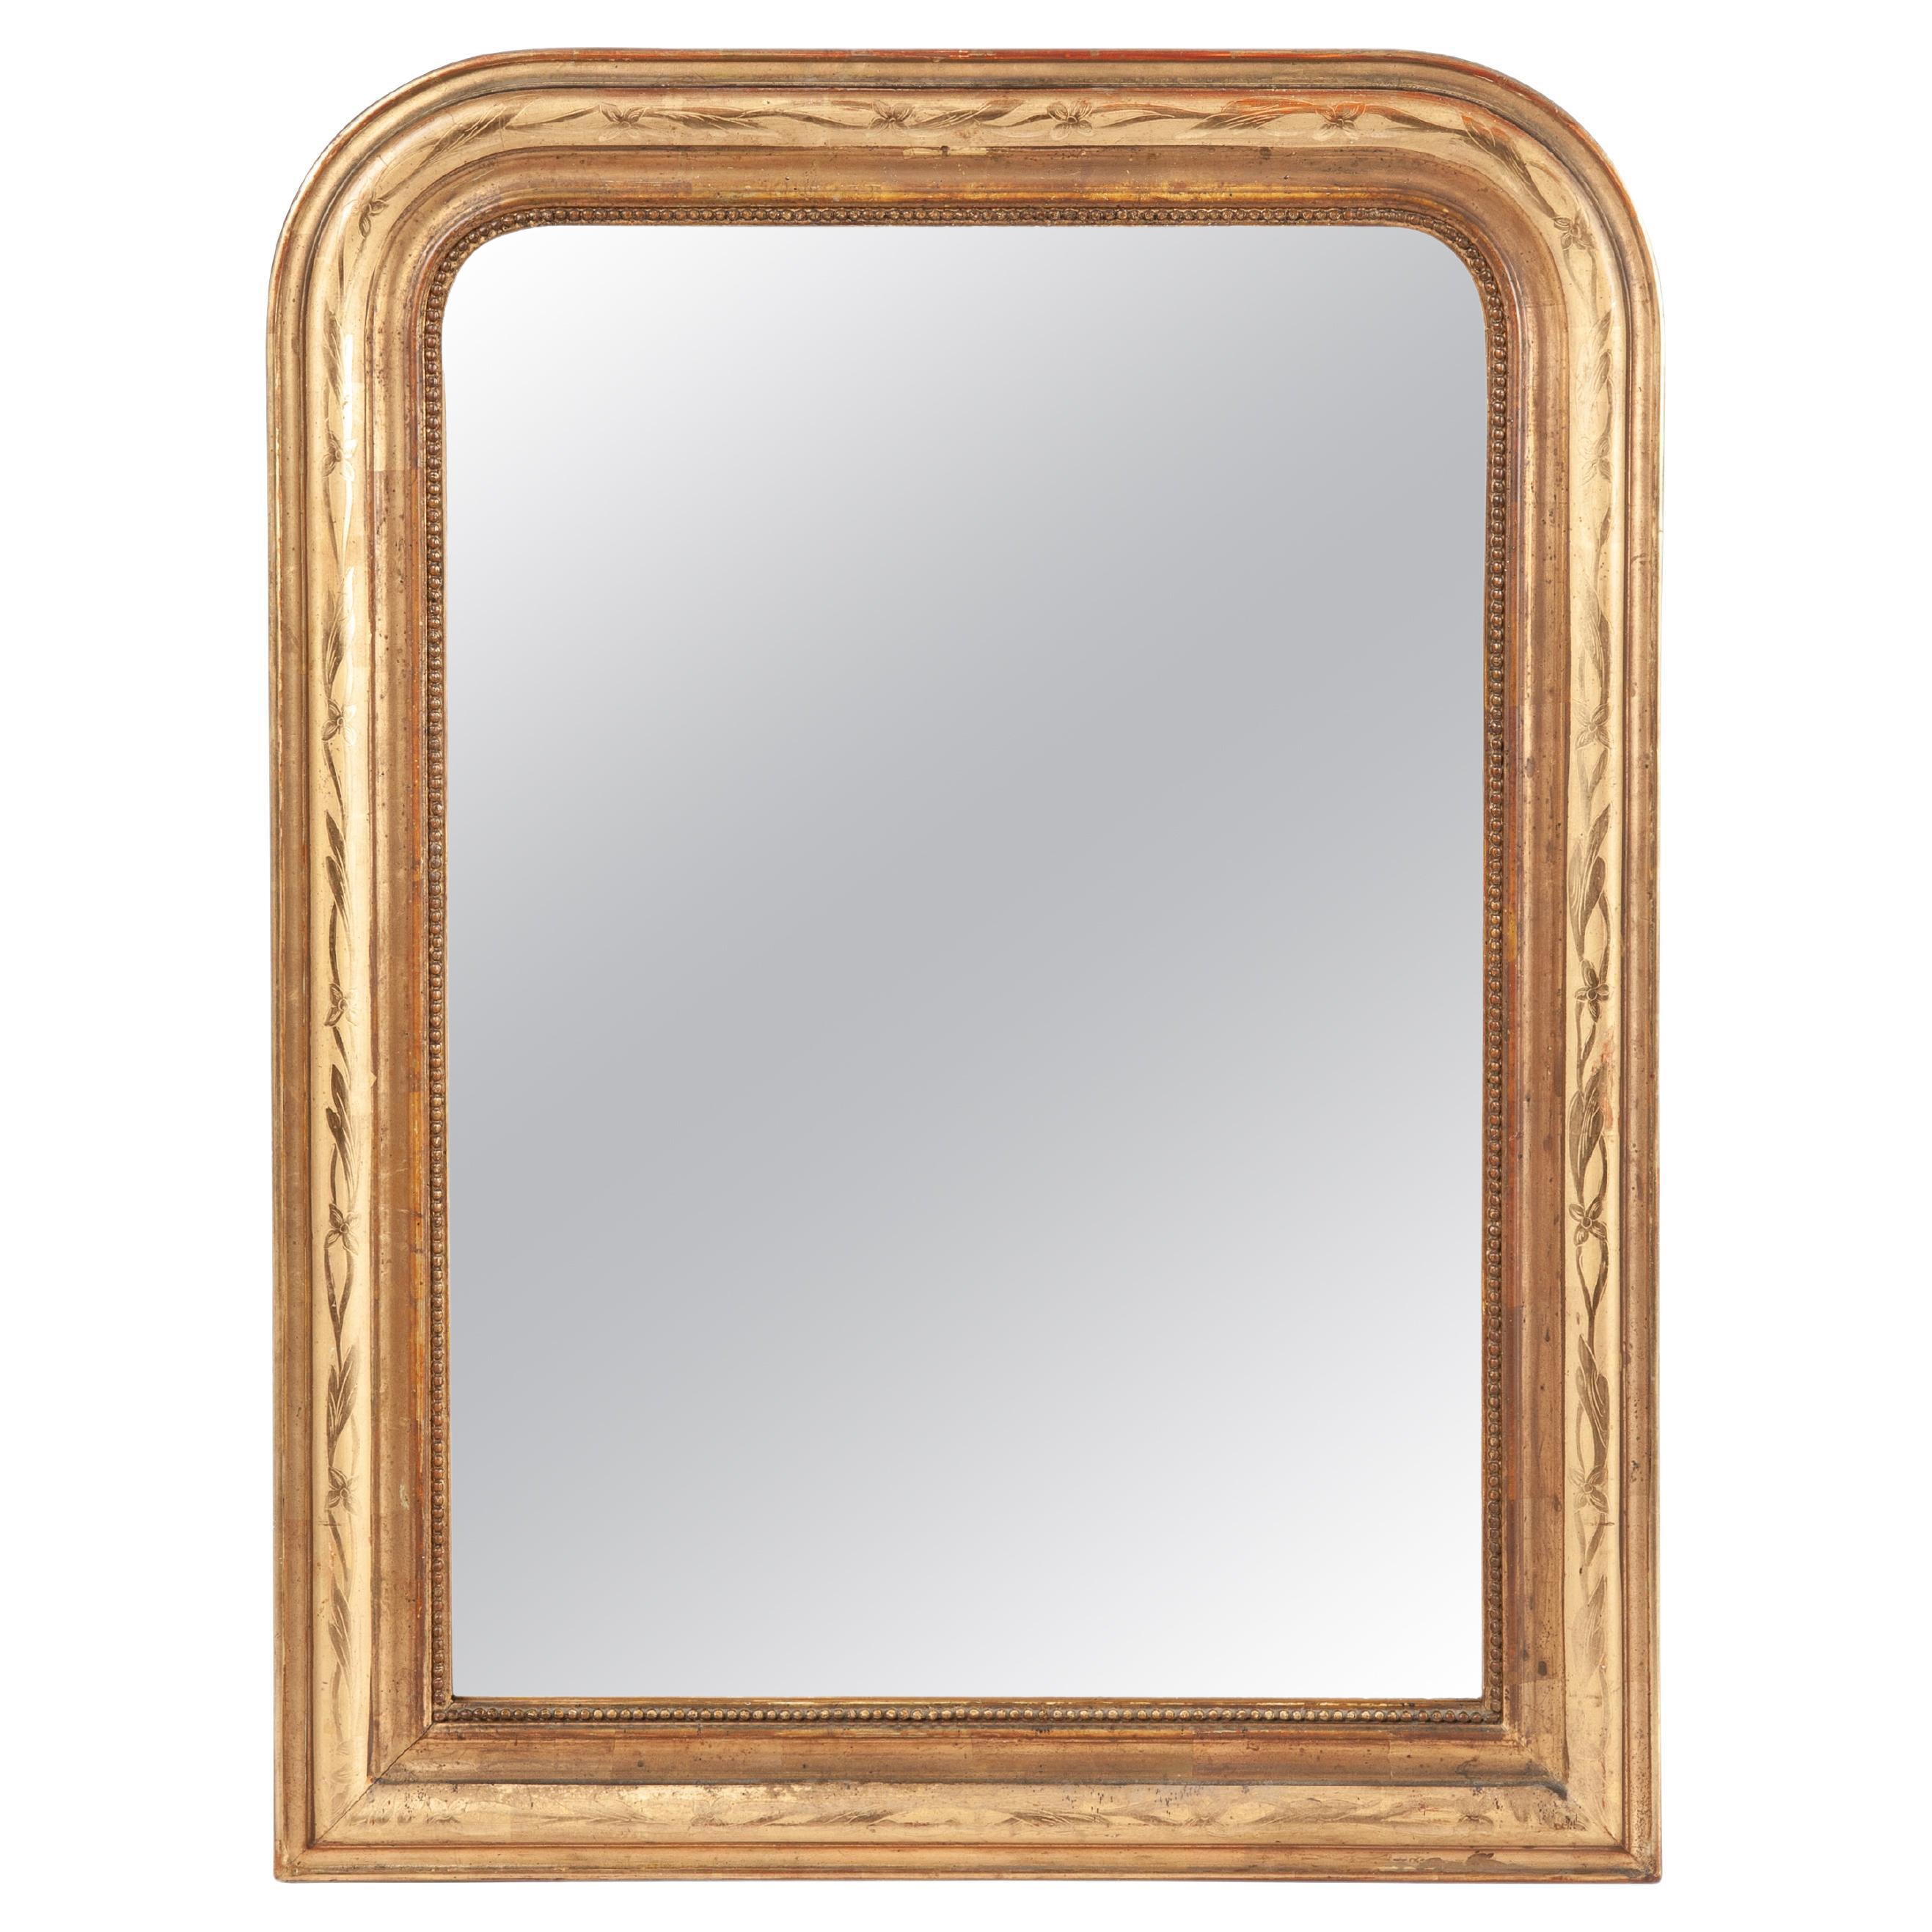 Antique 19th-century gold leaf gilt and engraved French Louis Philippe Mirror For Sale